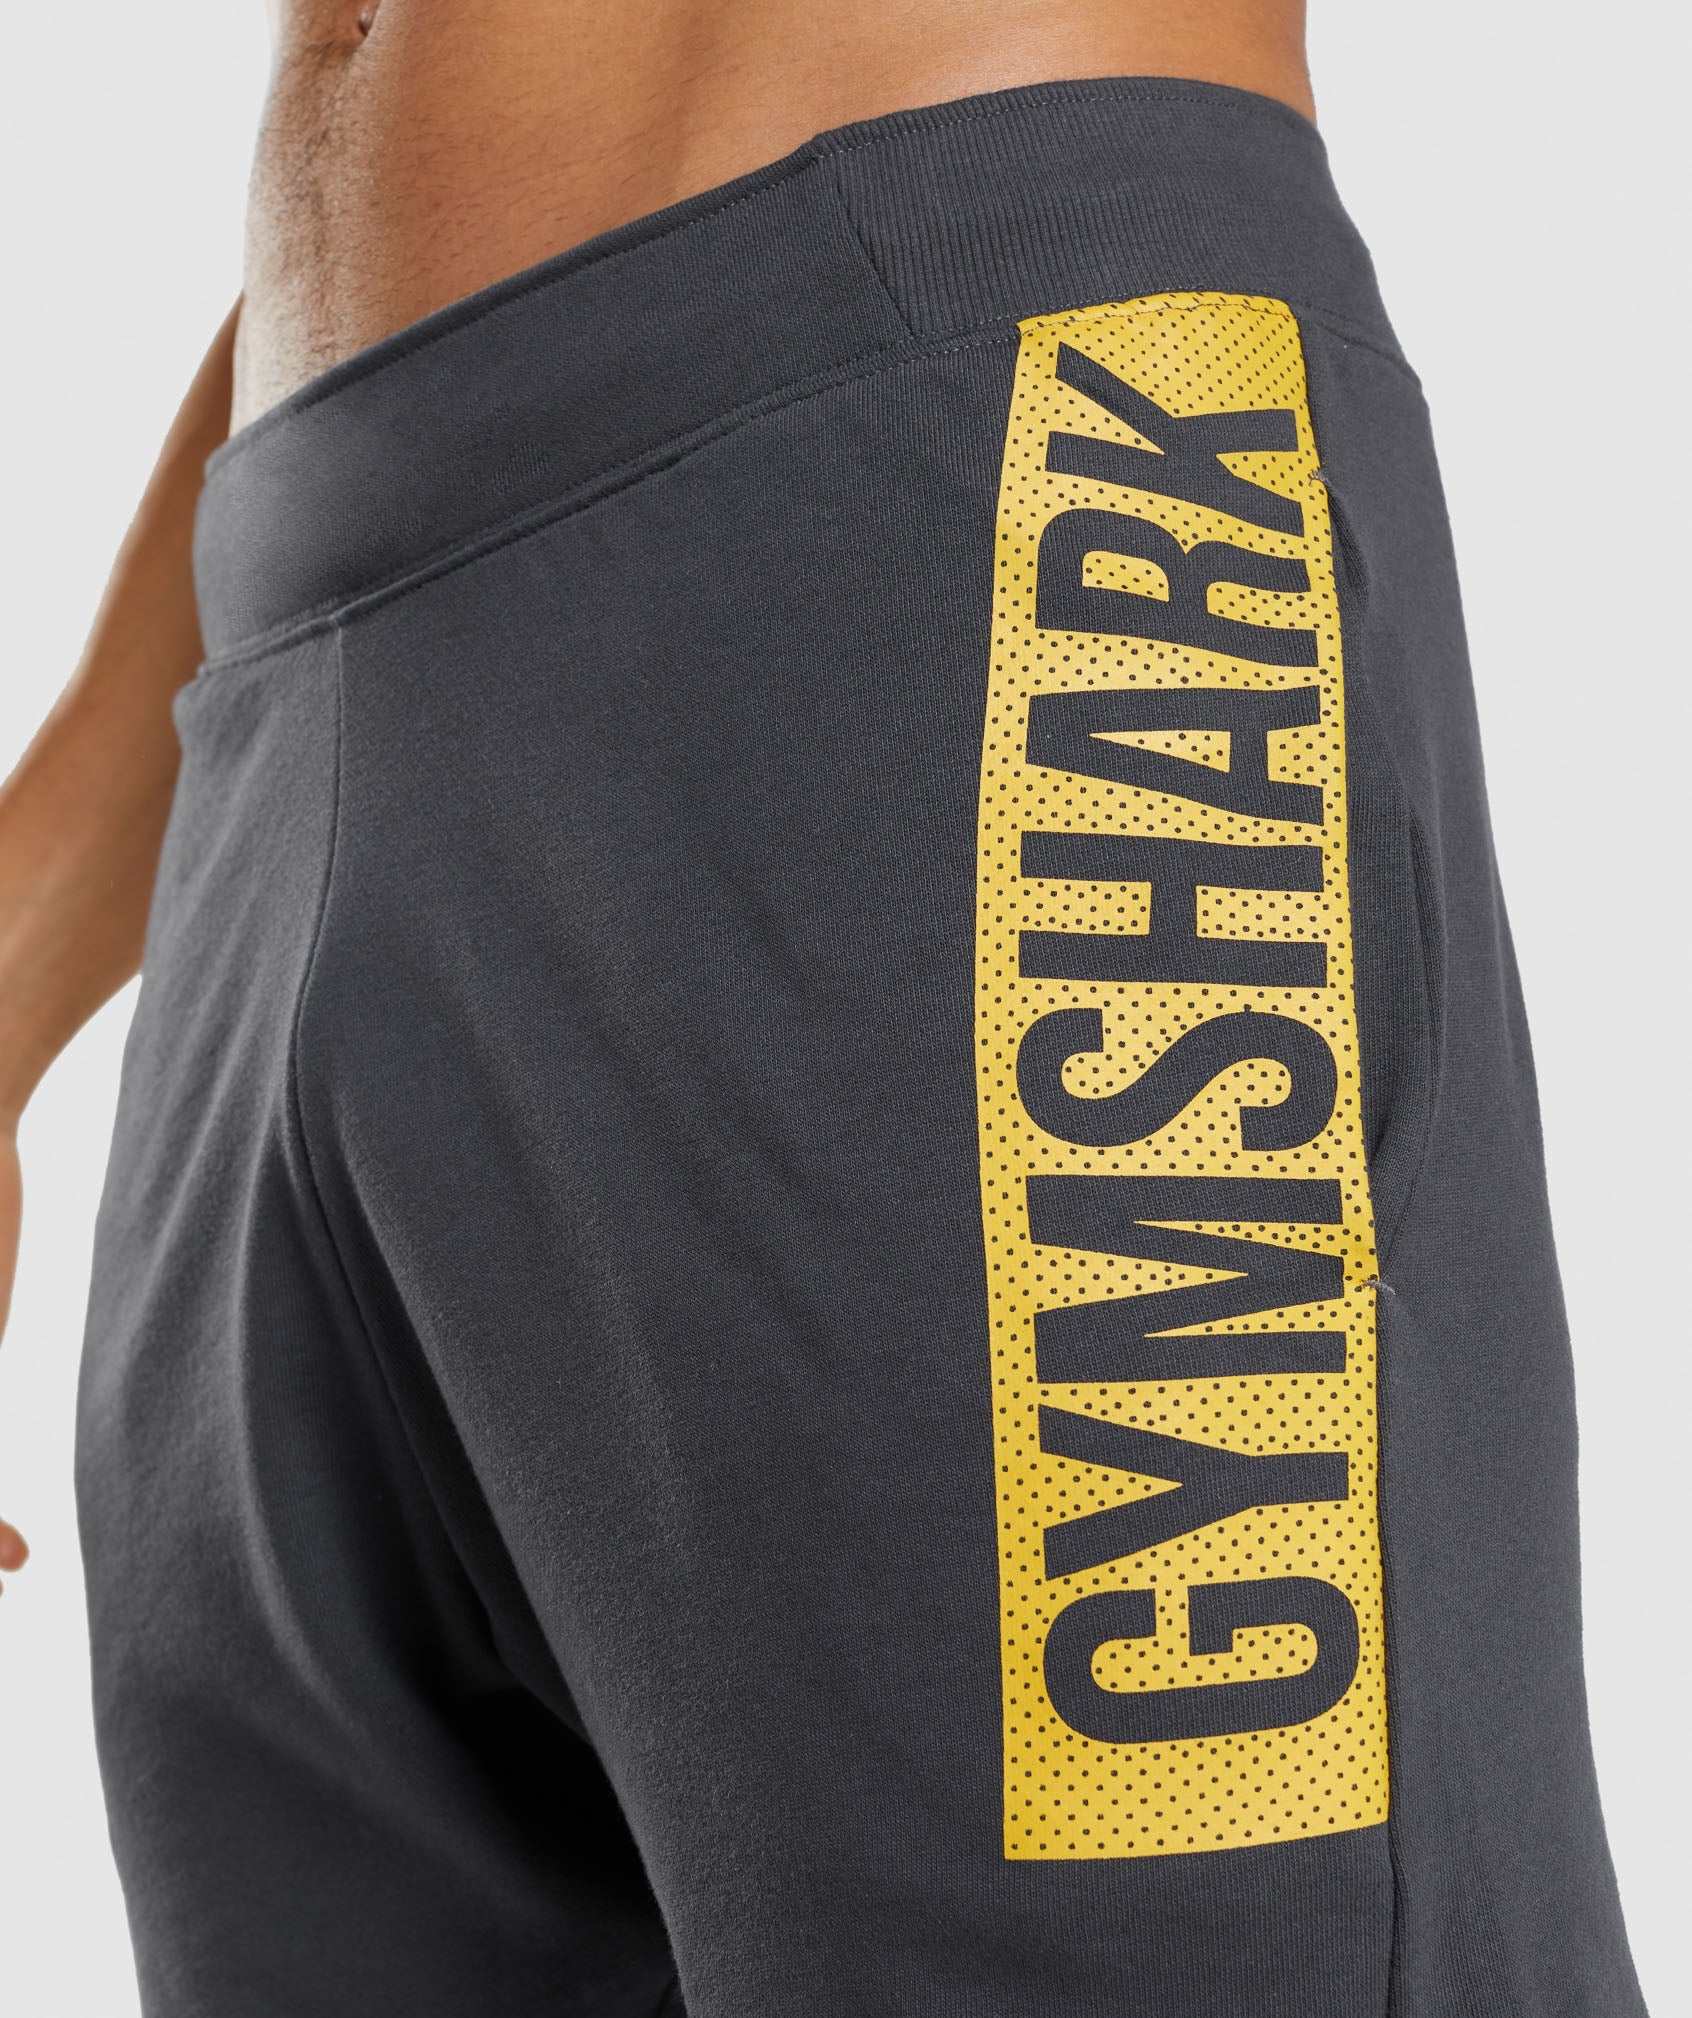 Bold Shorts in Onyx Grey - view 6